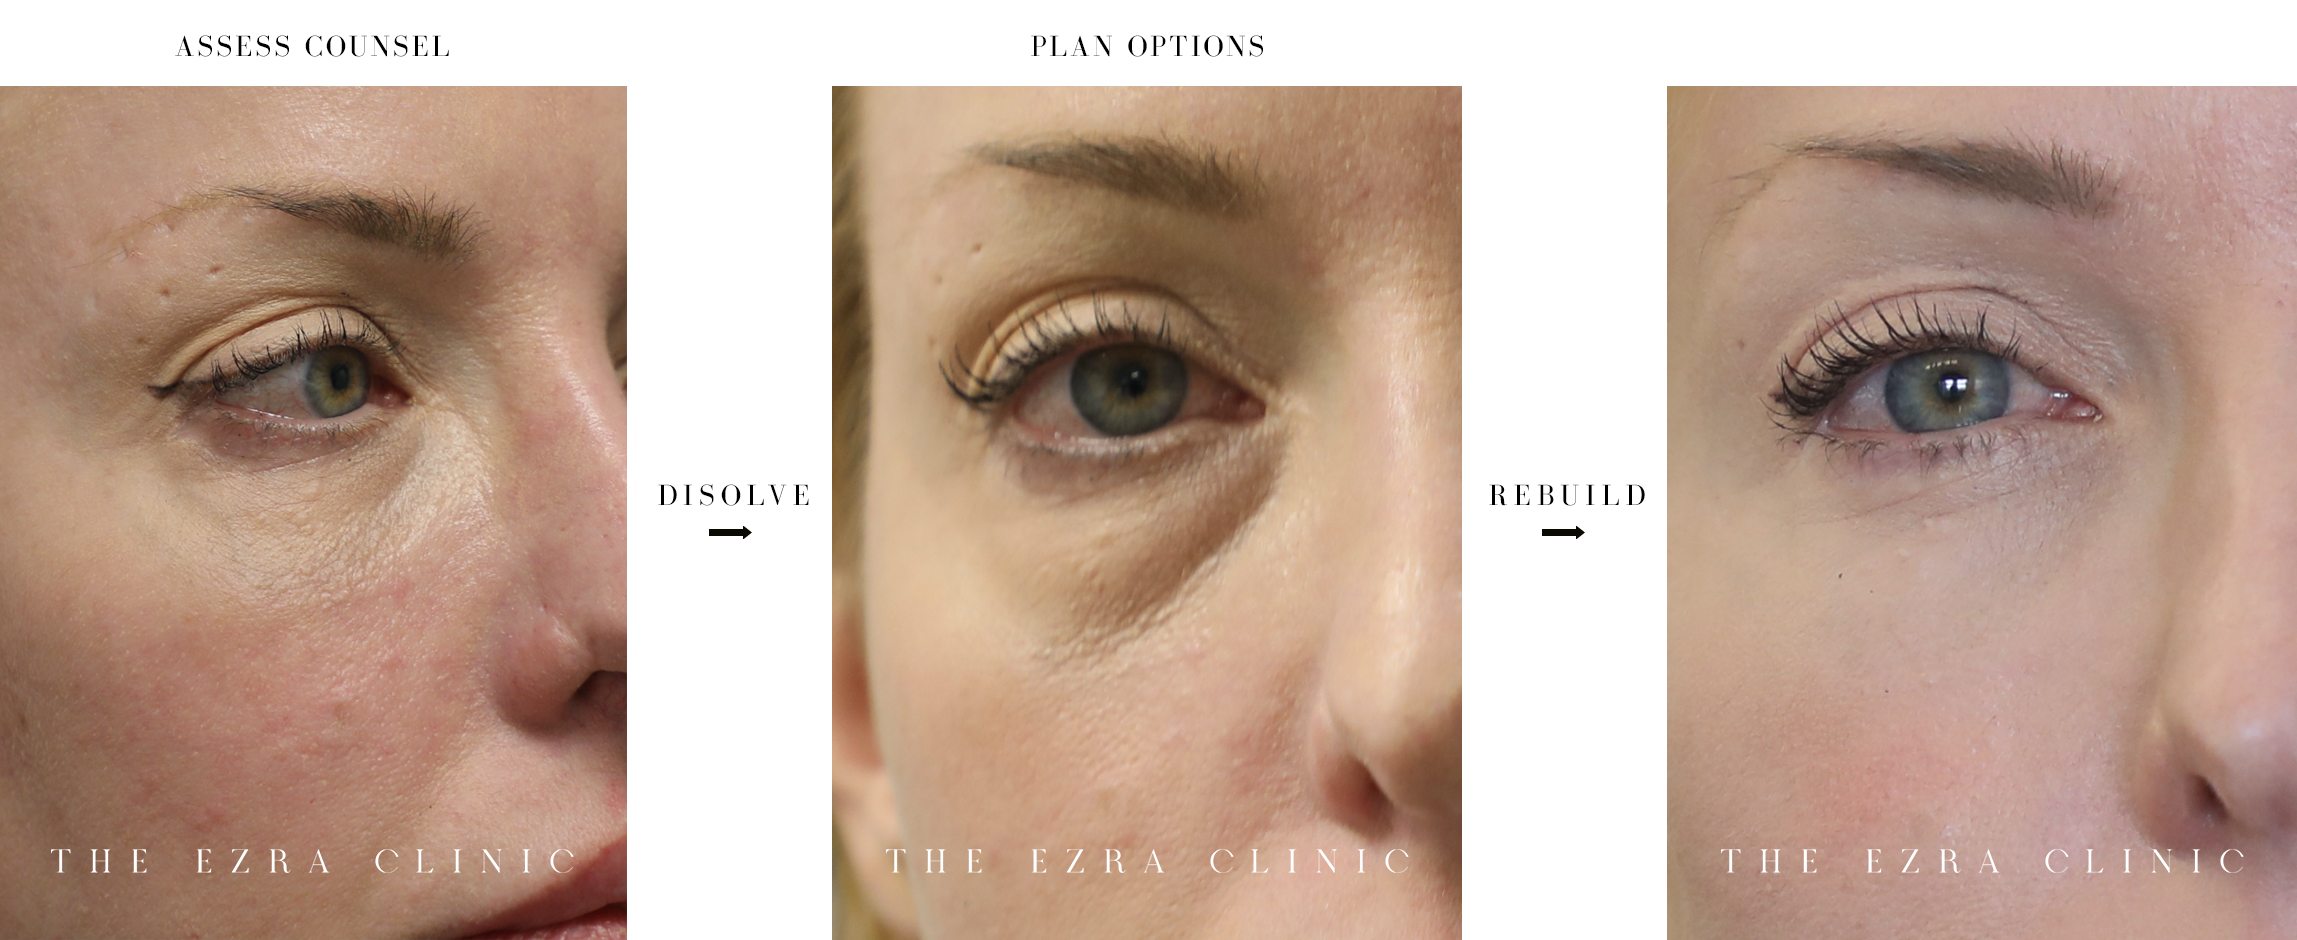 process of filler dissolving on a woman's eye area. It shows the before and after in three steps: assess counsel, disolve and rebuild. 